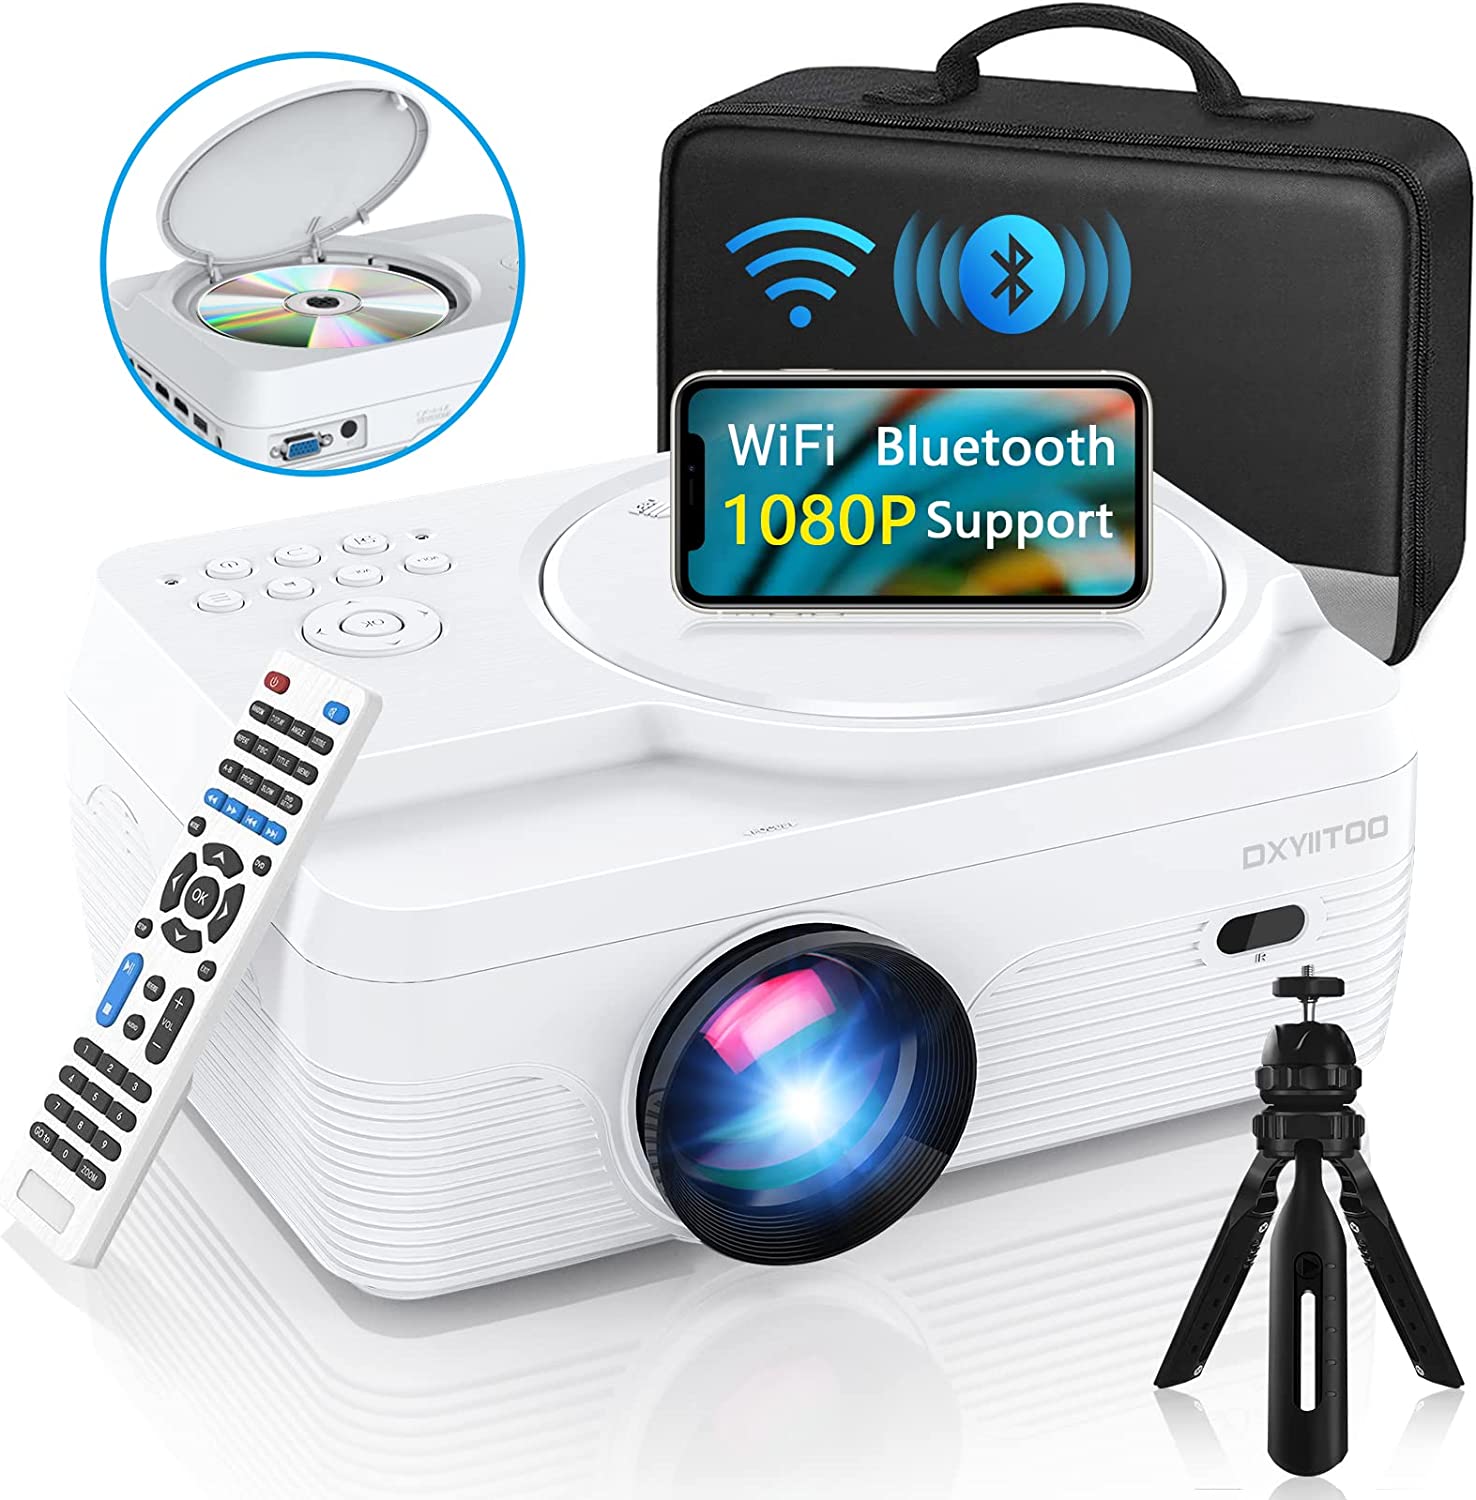 Best for High brightness: Dxyiitoo Projector